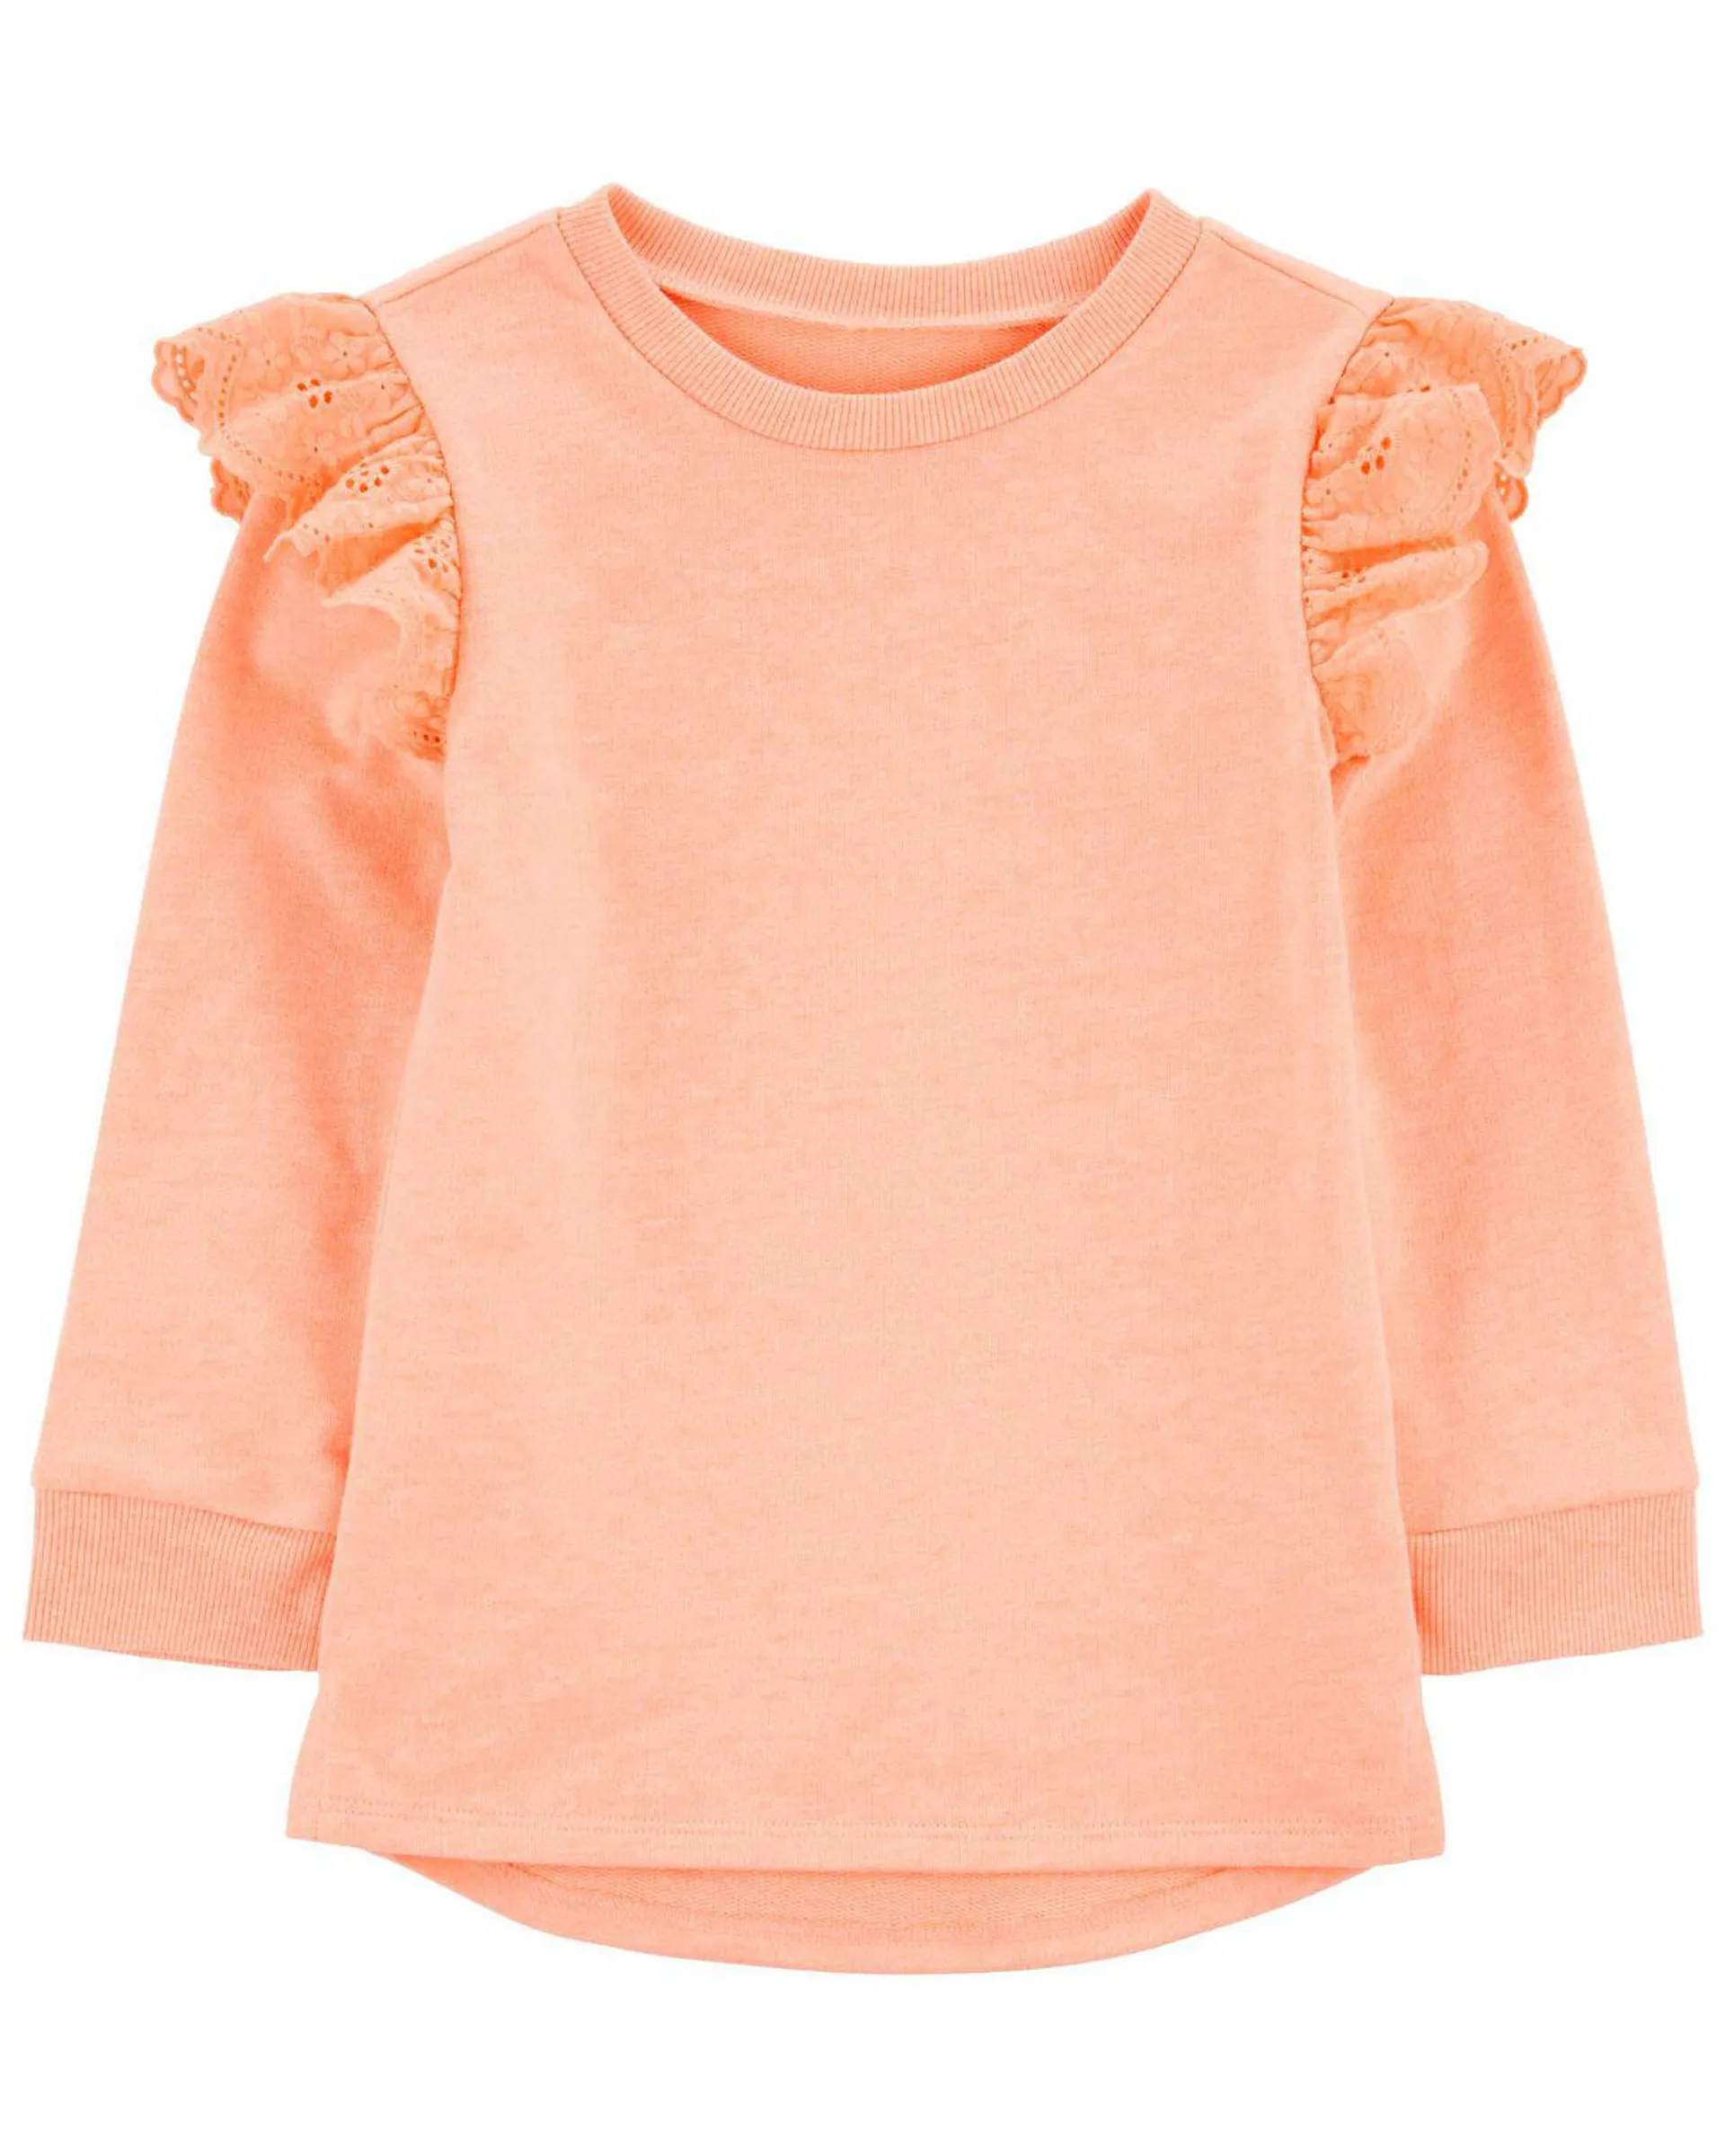 Baby French Terry Eyelet Ruffle Top